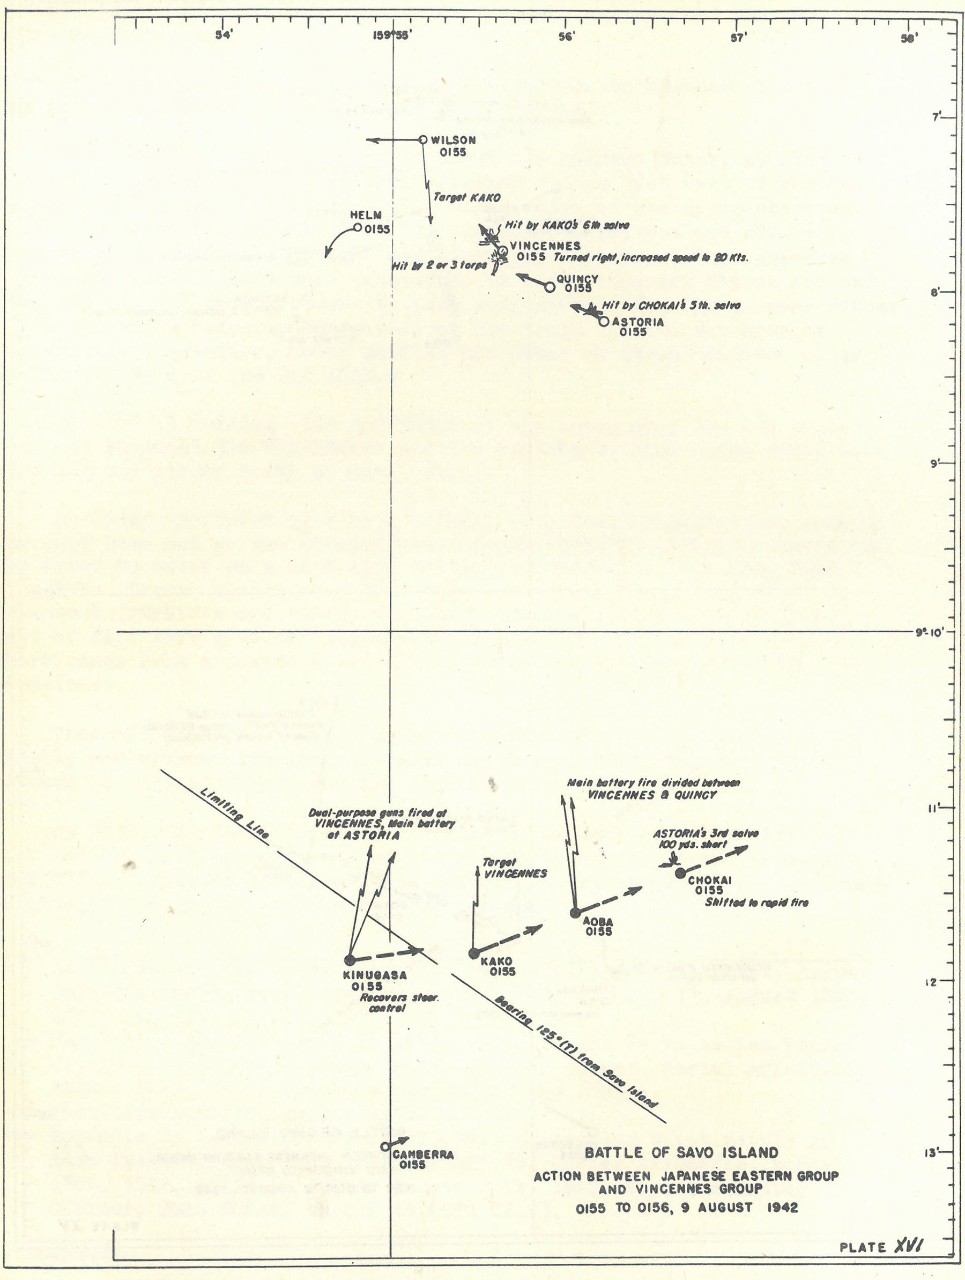 Plate 1: Battle of Savo Island, Action Between Japanese Eastern Group and Vincennes Group, 0155 to 0156, 9 August 1942 - chart - The Battle of Savo Island August 9, 1942 Strategical and Tactical Analysis